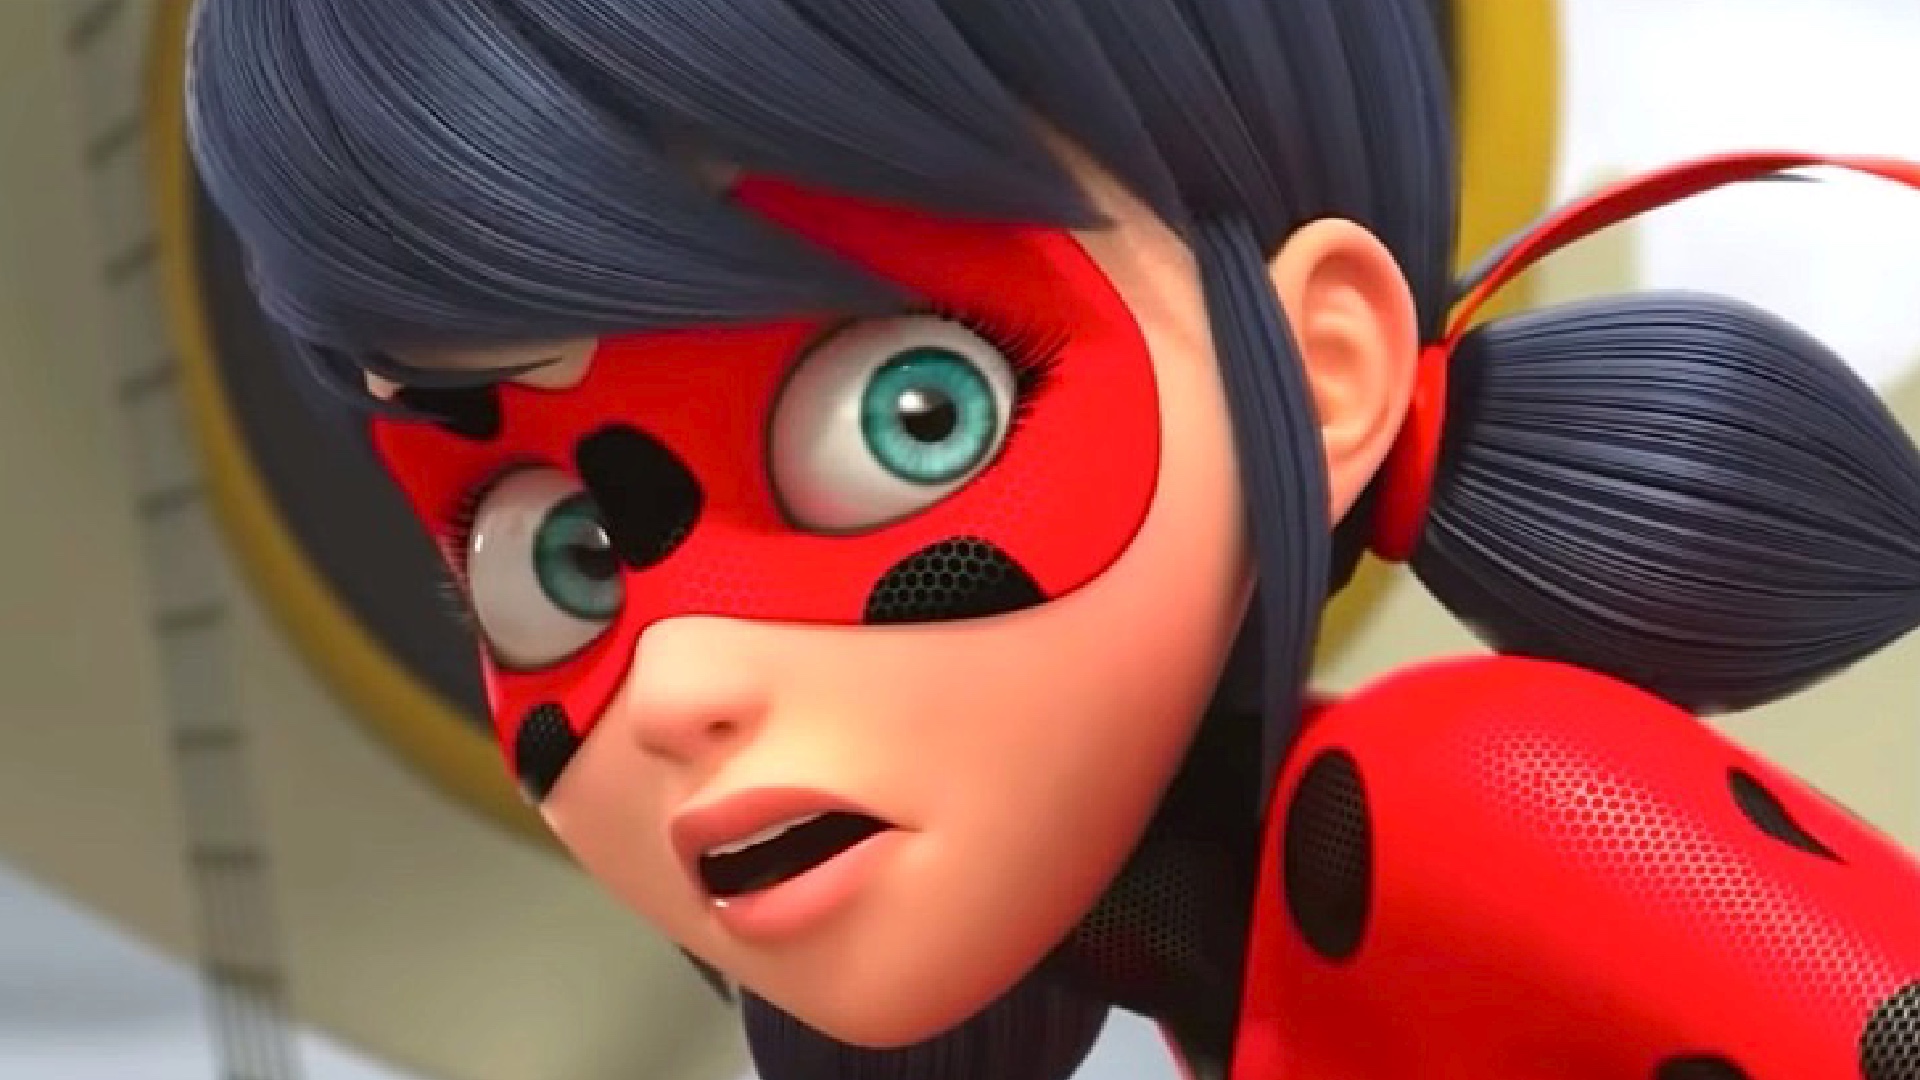 What if Sonic characters were to play Miraculous Ladybug